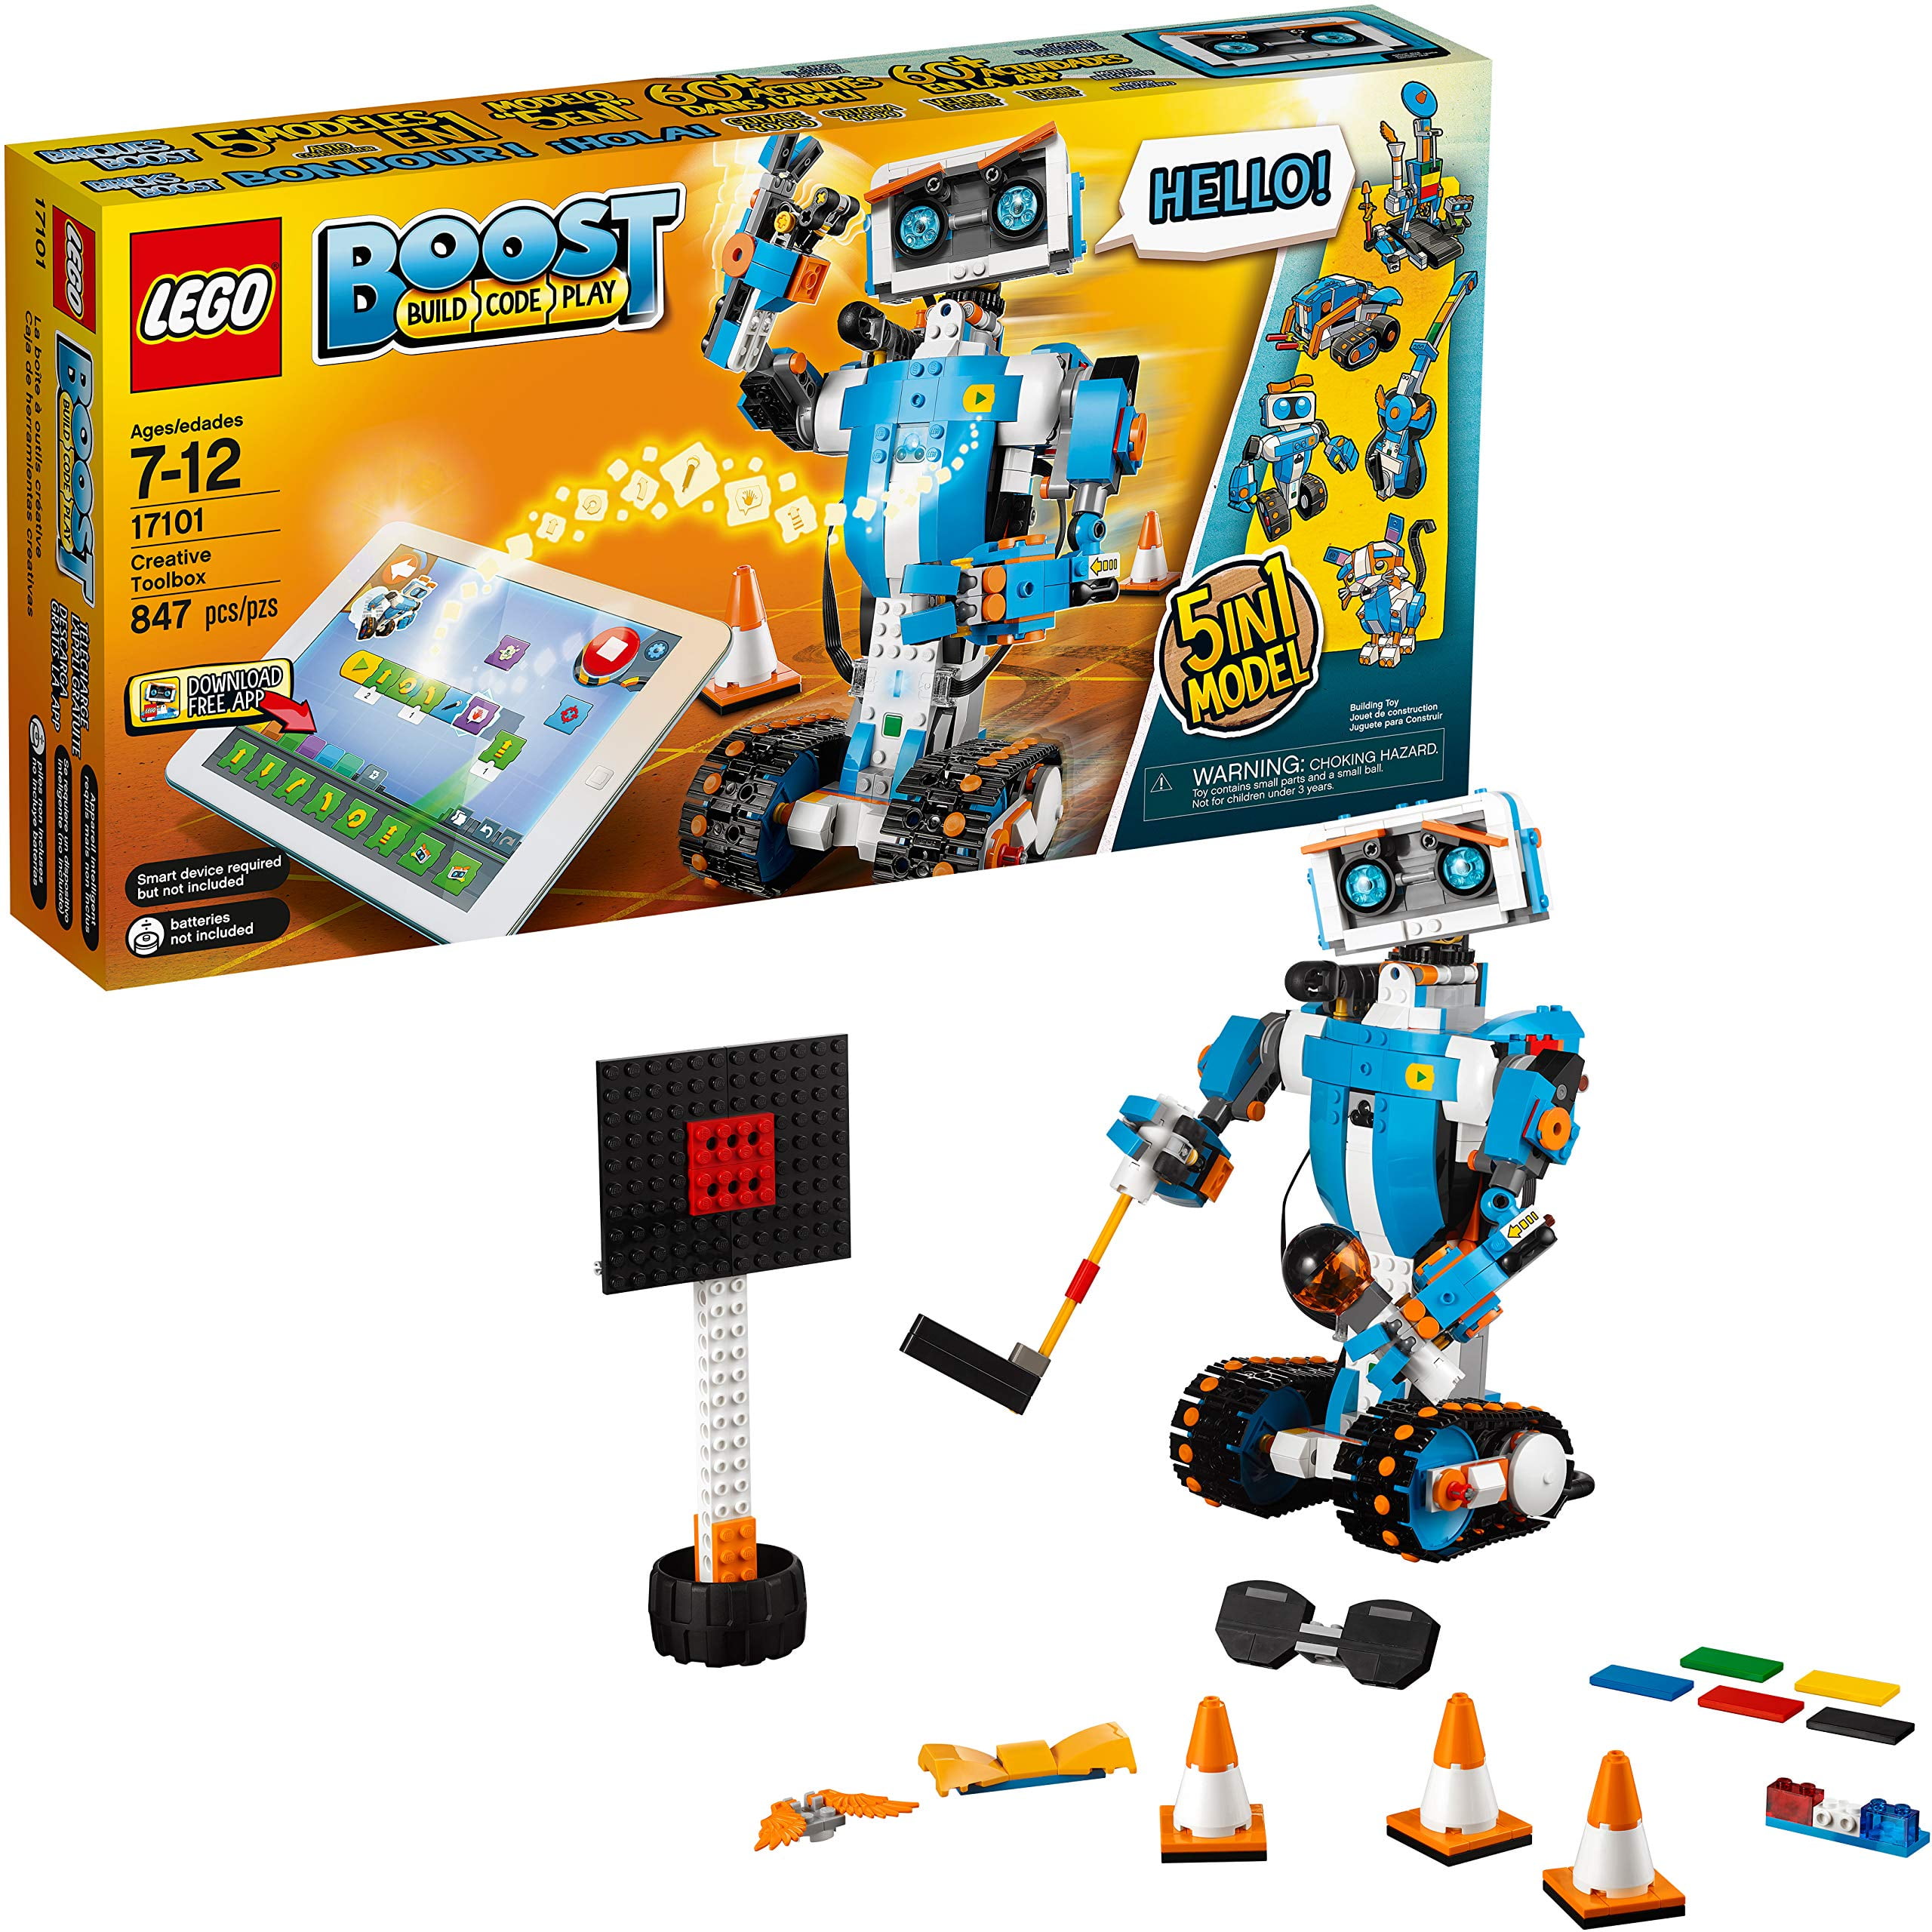 LEGO Boost 17101 Building and Kit (847 Pieces) - Walmart.com